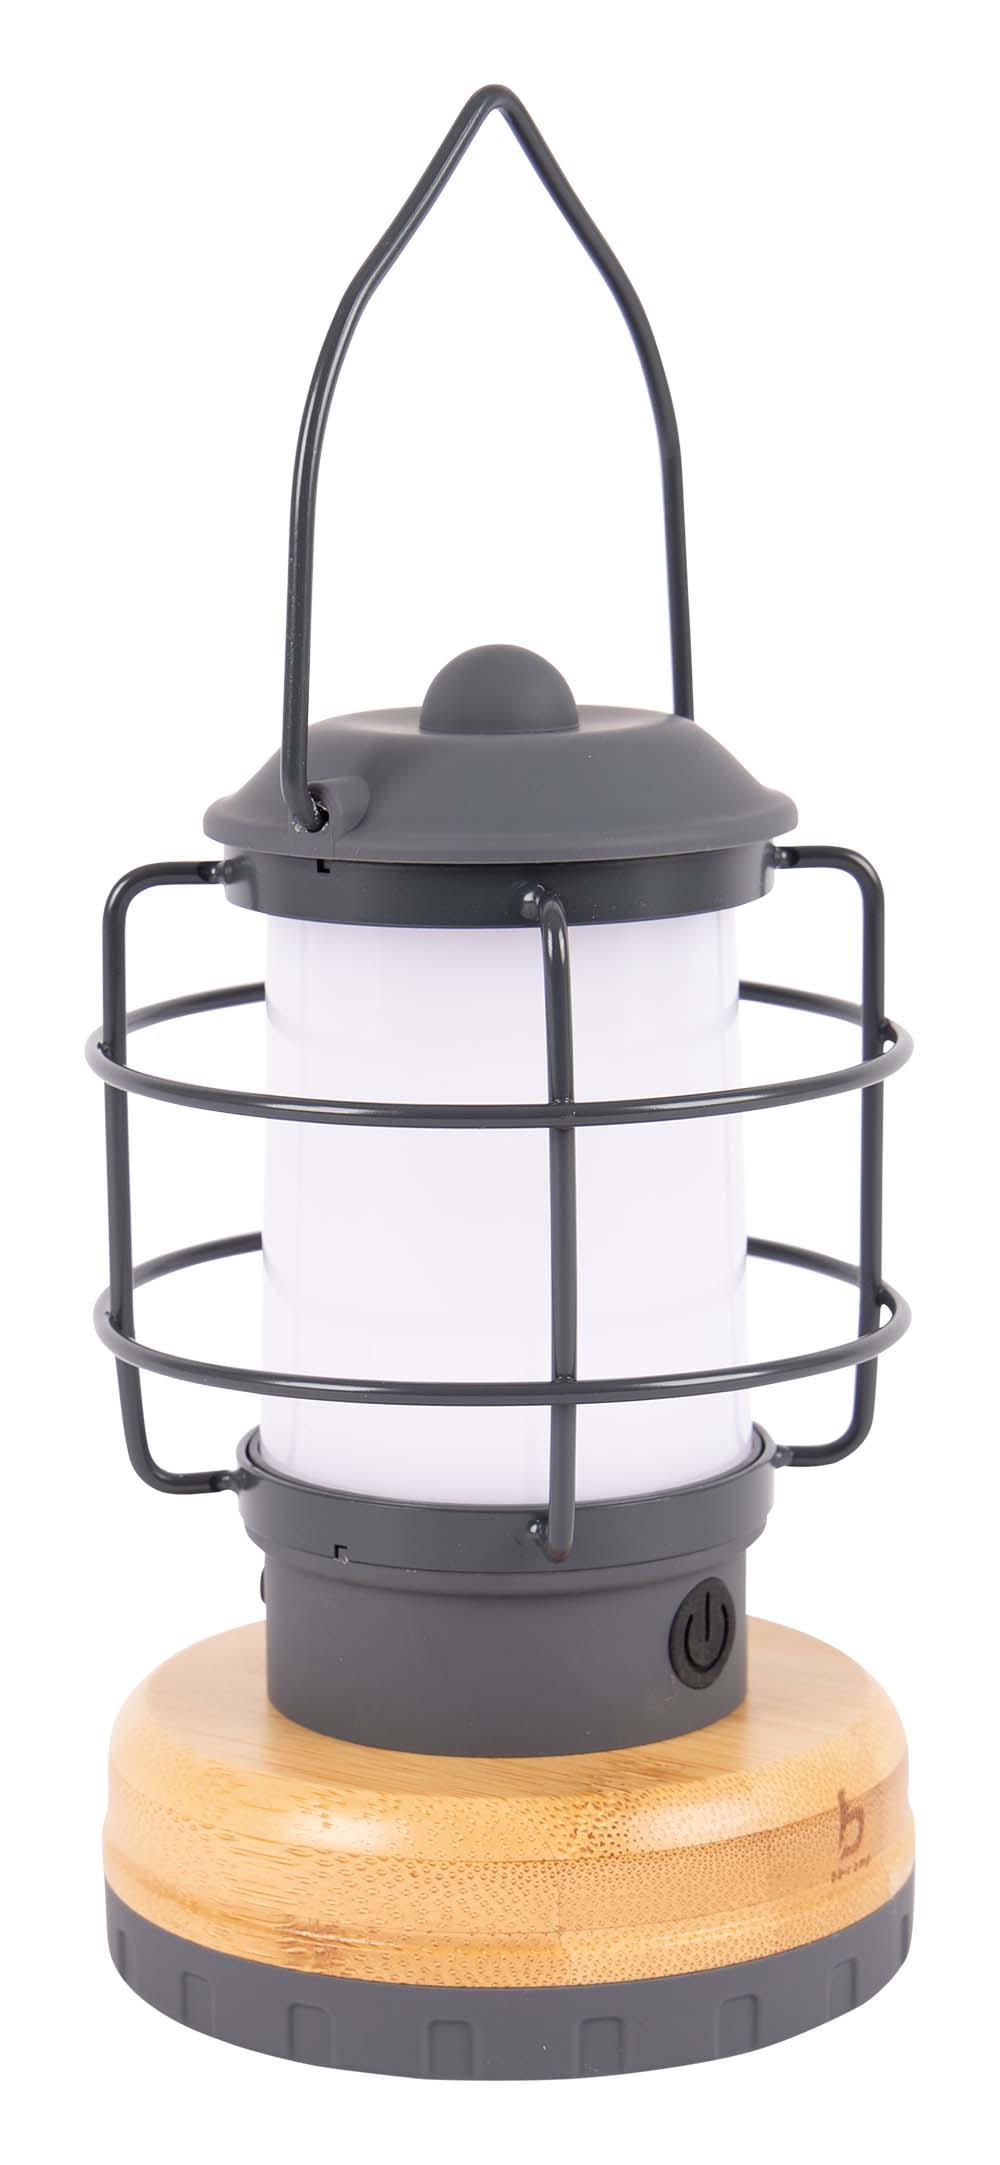 5818981 A stylisch lantern from the Industrial collection. The combination of bamboo and the dark grey color gives the lantern a modern look. The lantern has a warm white LED light with stepless dimming function. Furthermore, it has a built-in Li-ion battery which can be charged with the included USB cable. Ideal for on a table, cabinet or to hang on to something with the handle.